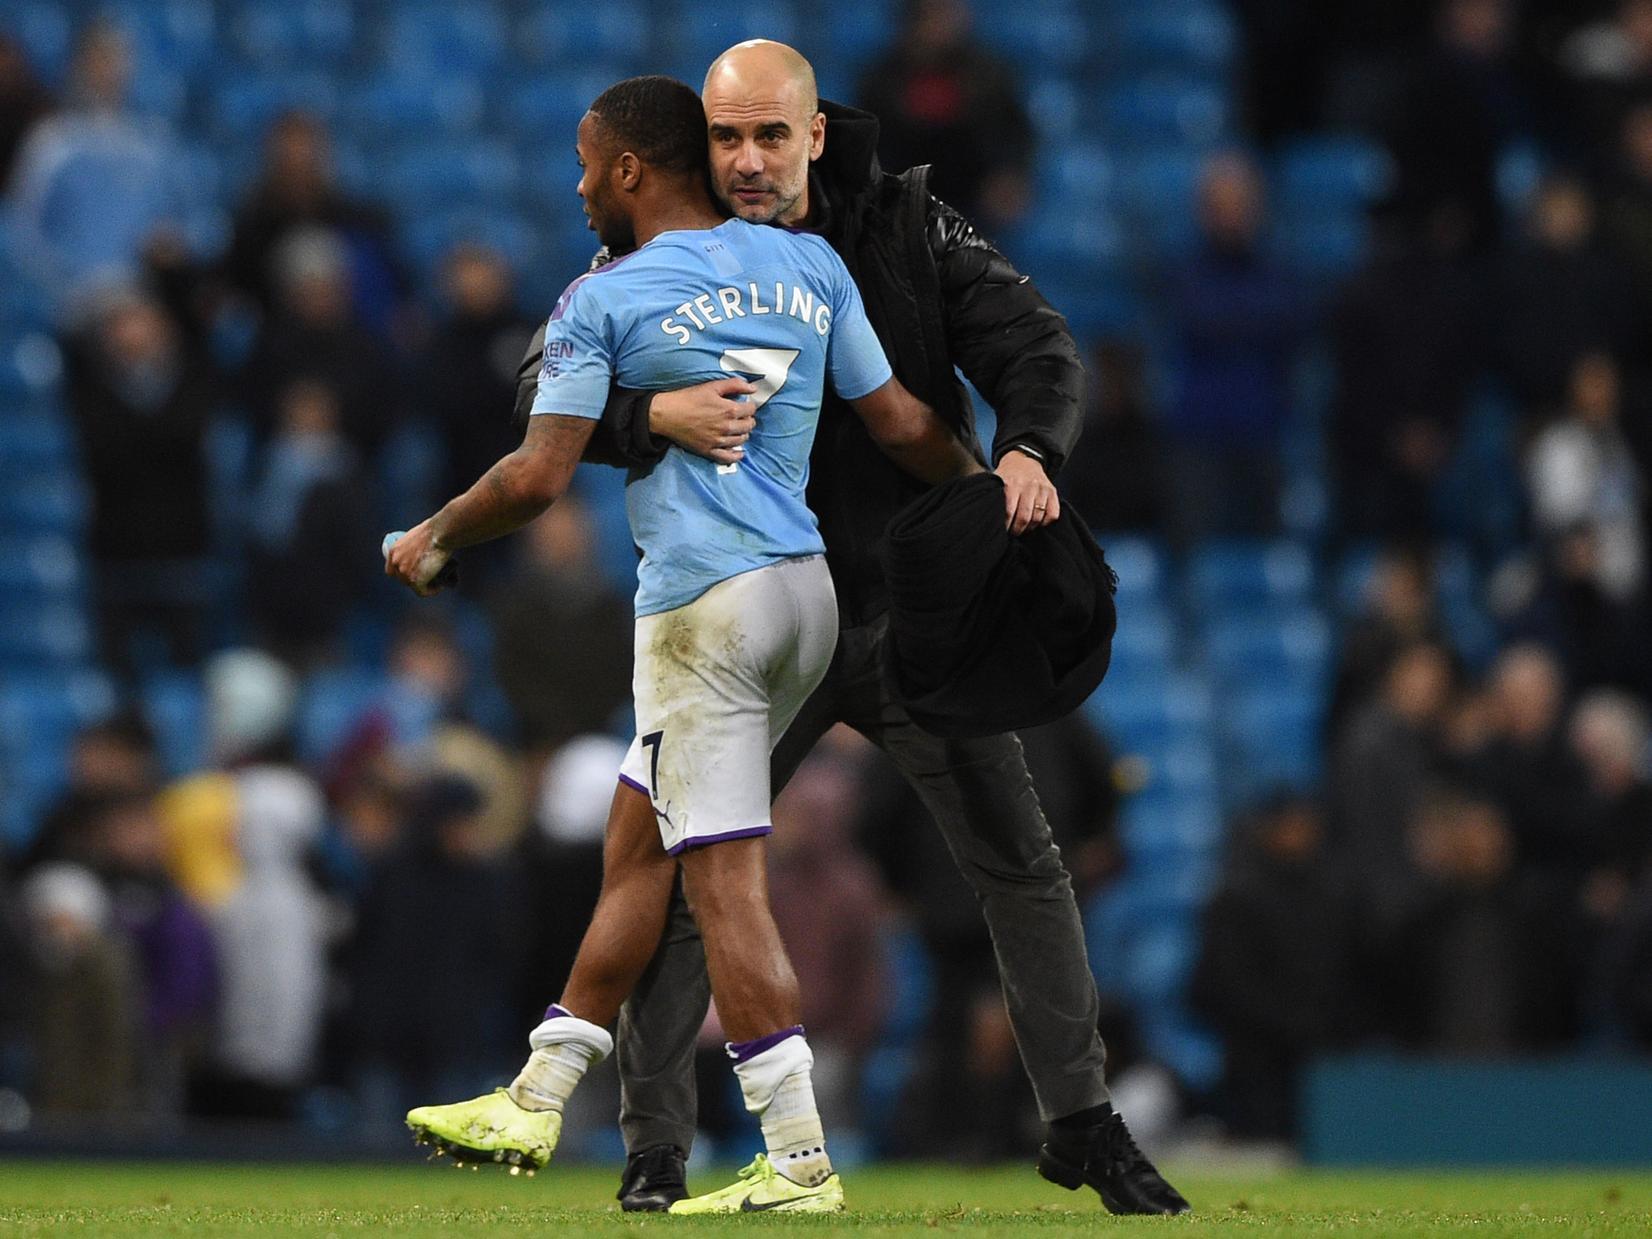 The Citizens are battling on despite their shock two-year expulsion from Europe, Pep Guardiola has claimed he has no doubts over his players' loyalty, despite Raheem Sterling being linked with Real Madrid.